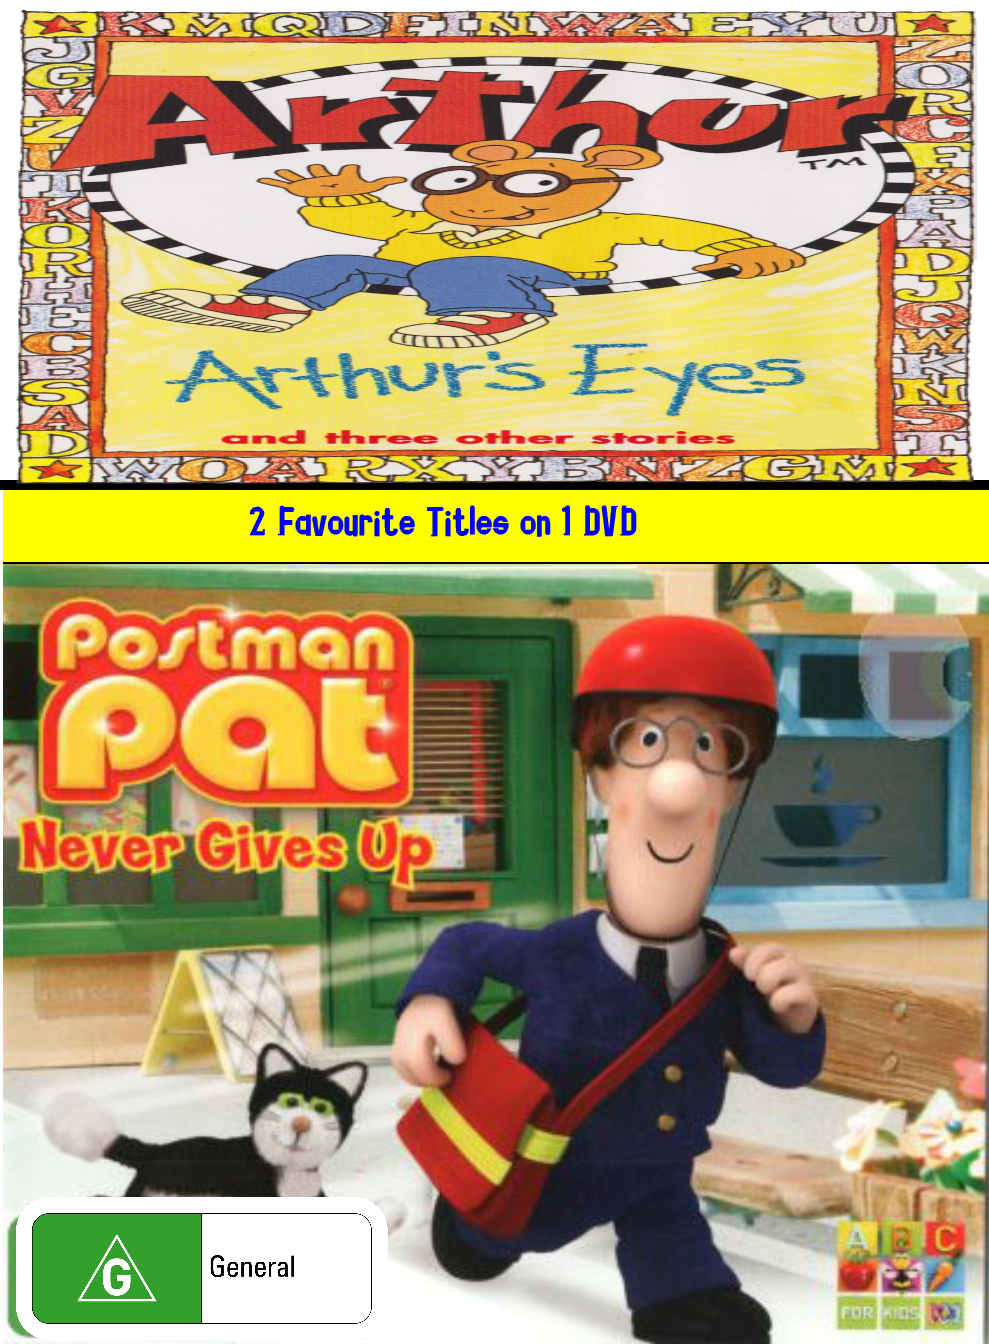 Arthur and Postman Pat: Arthur's Eyes and Never Gives Up | ABC For Kids  Wiki | Fandom